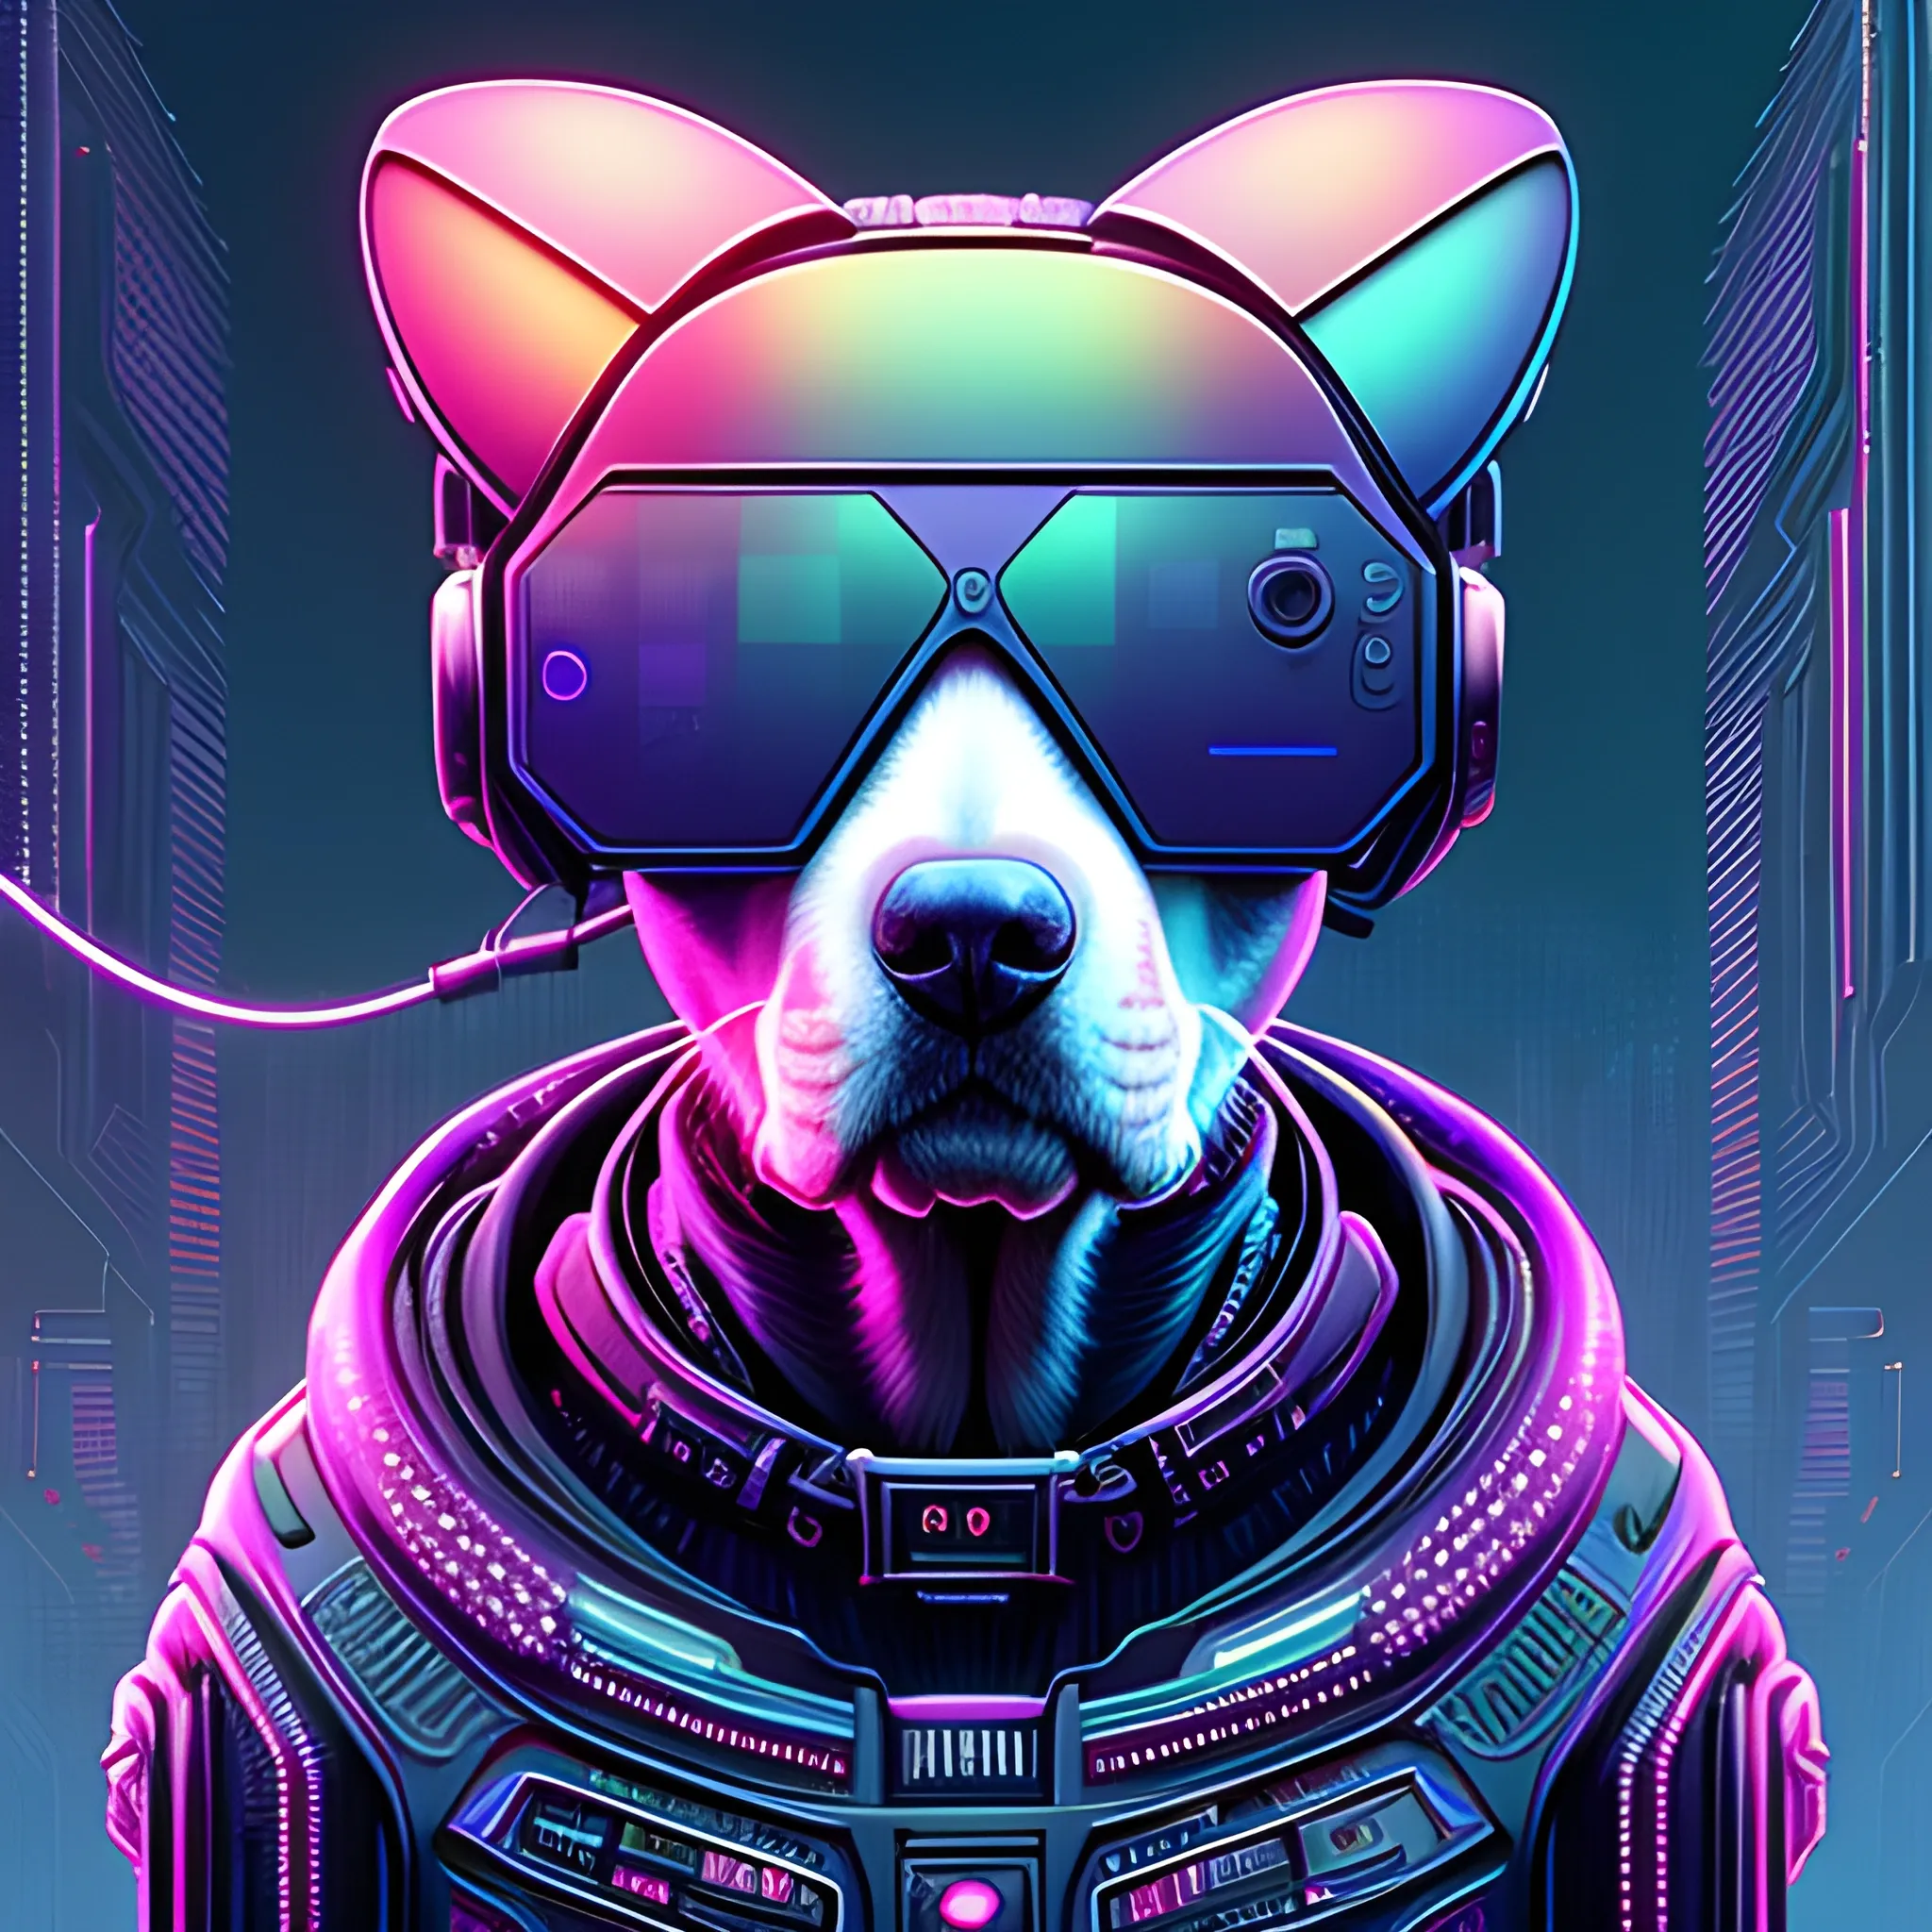 Silicon valley virtual reality 10 th anniversary, beagle dog with glasses, cyberpunk art by android jones, cyberpunk art by beeple, synthwave, darksynth, quantum tracerwave, wireframes